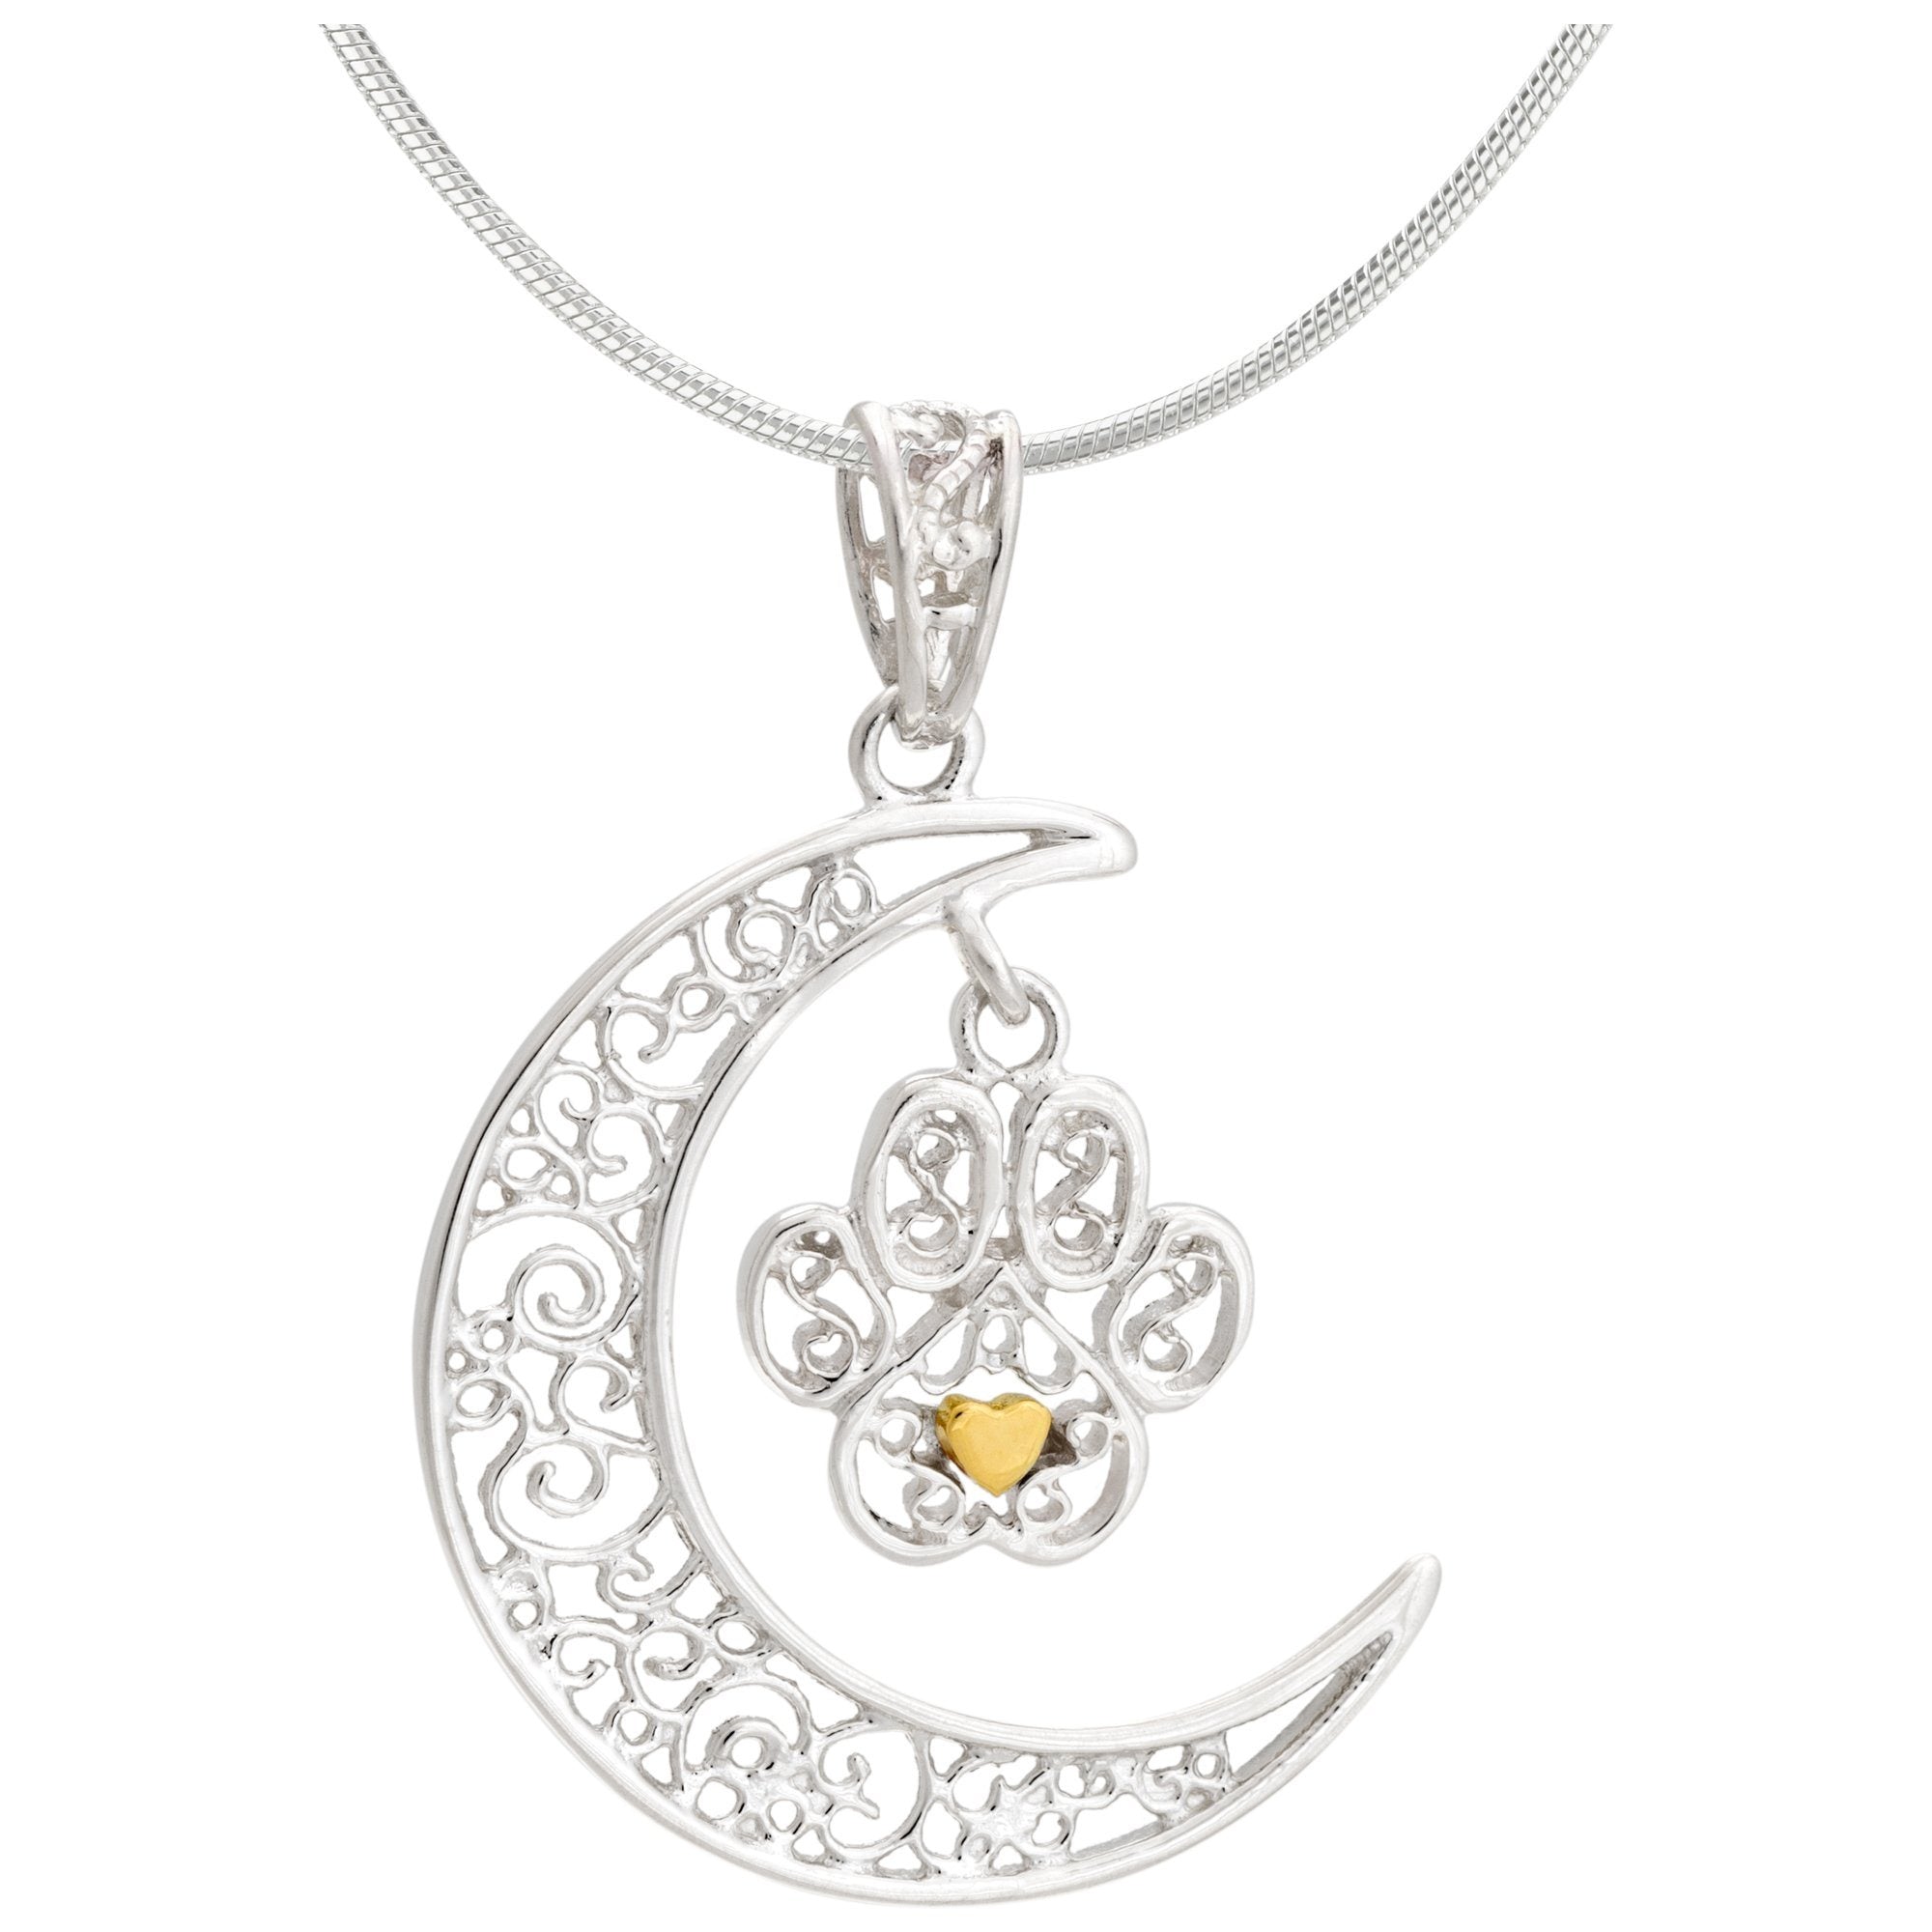 Filigree Moonlight Paw Sterling Necklace - With Diamond Cut Chain